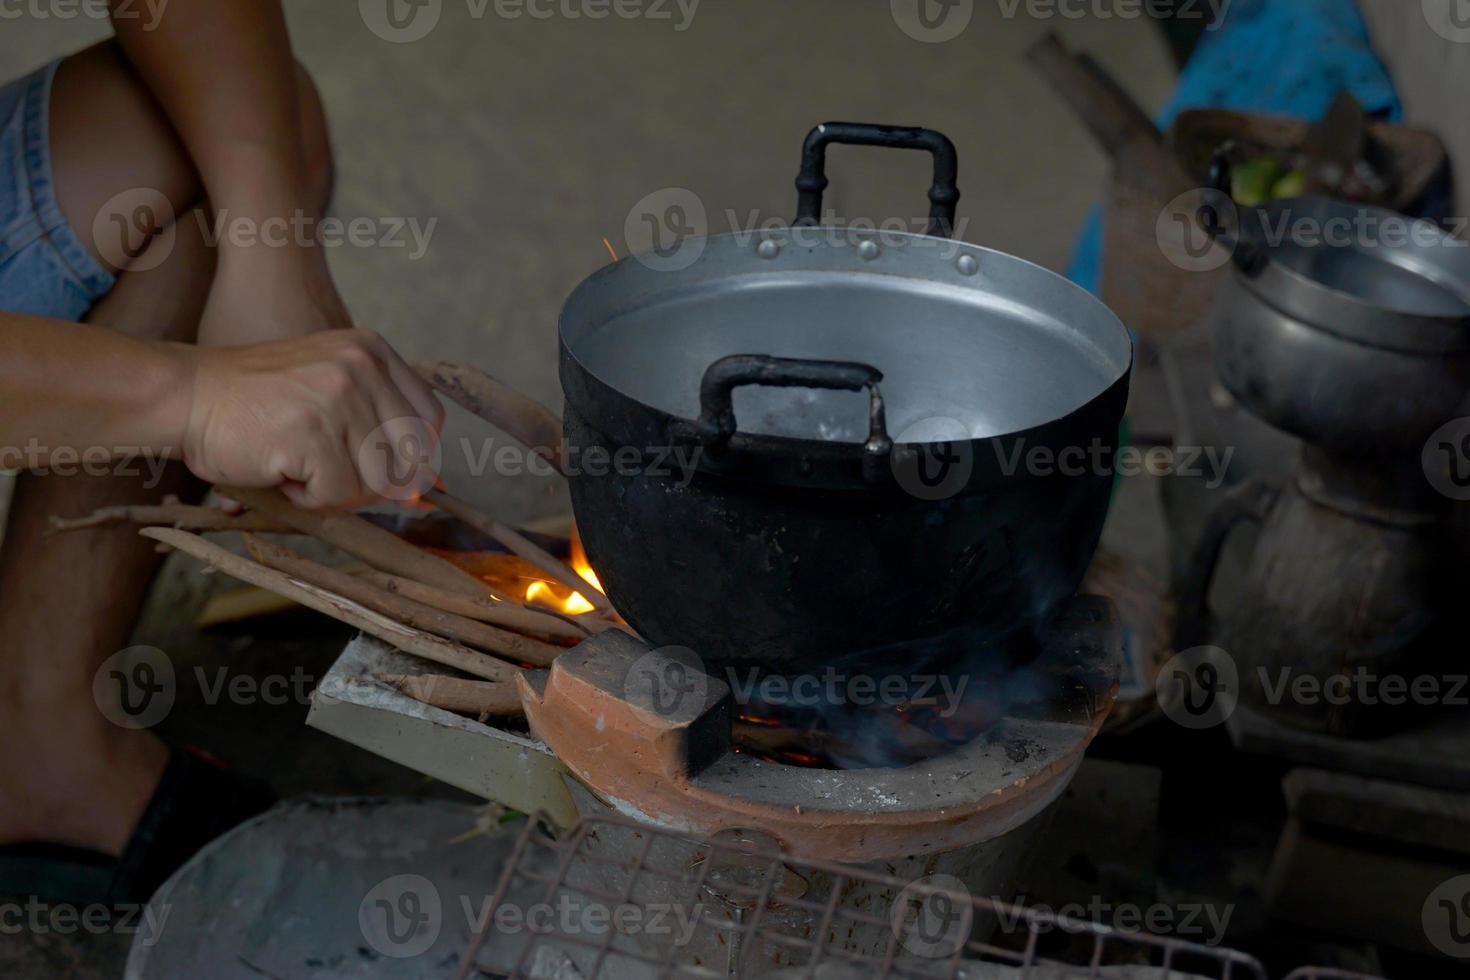 Villagers are cooking food from a wood-fired brazier. The bottom of the pot has black soot while cooking. The brazier fire is still used in rural kitchens in the North and Northeast of Thailand. photo